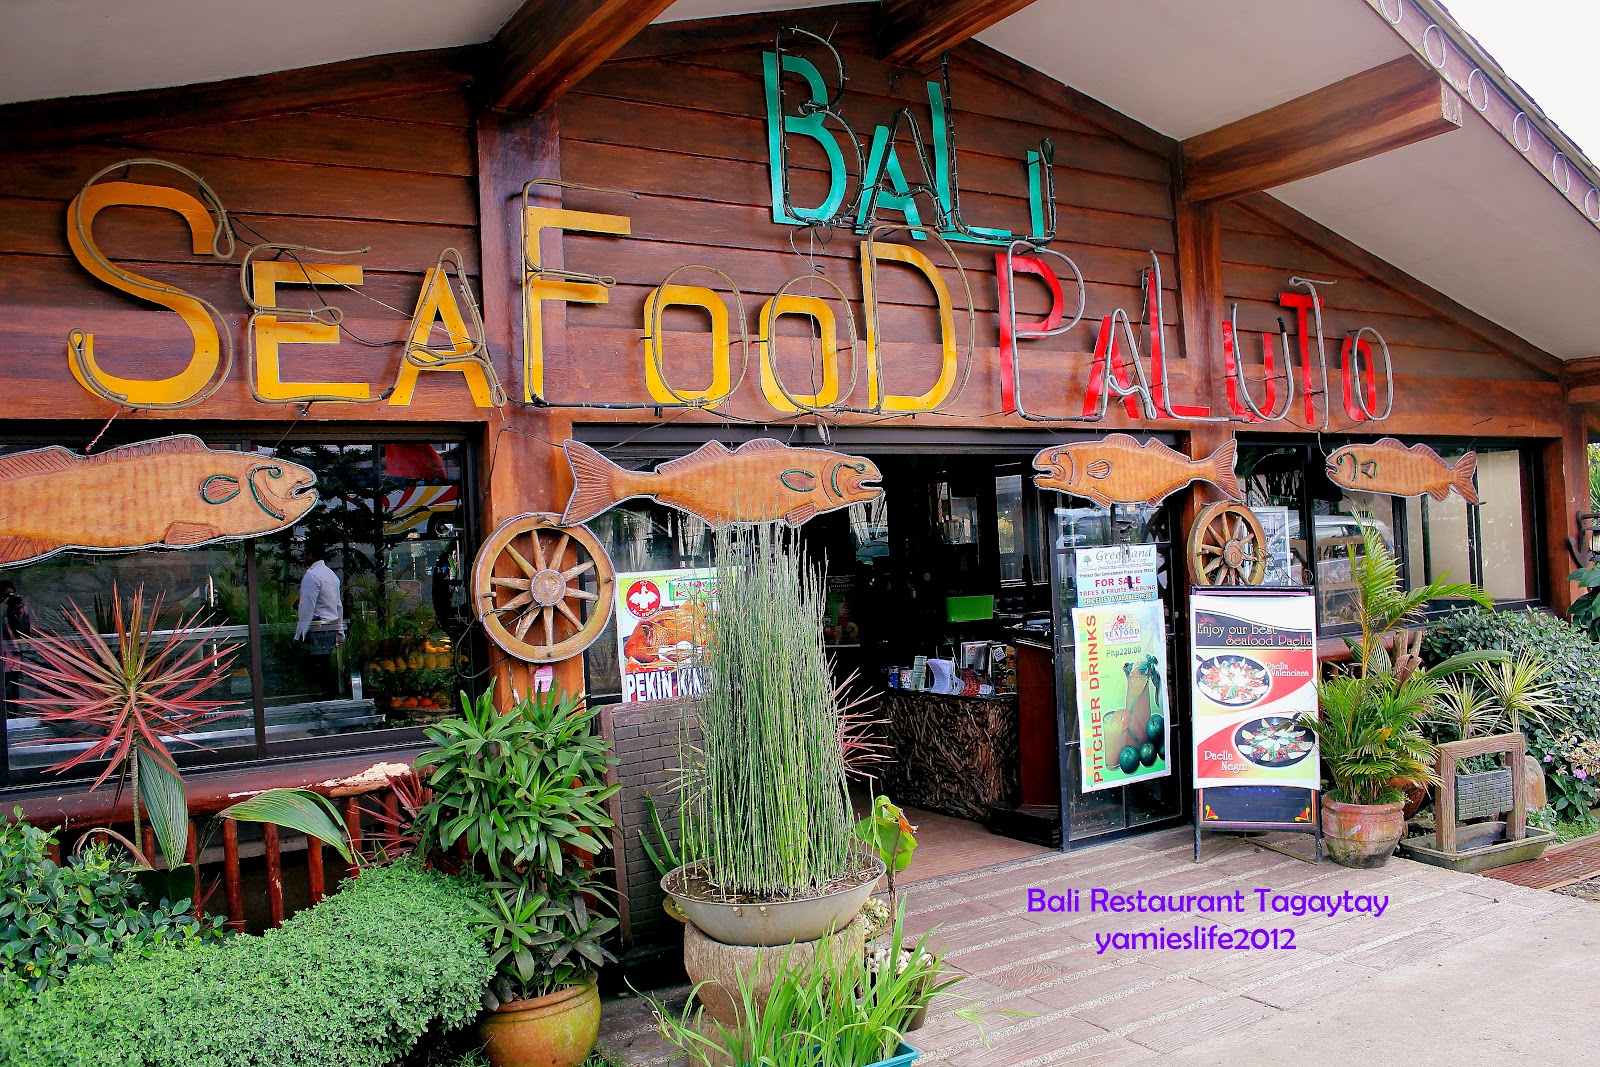 My Life in Charms: Lunch Date @Bali Seafood Paluto, Tagaytay City